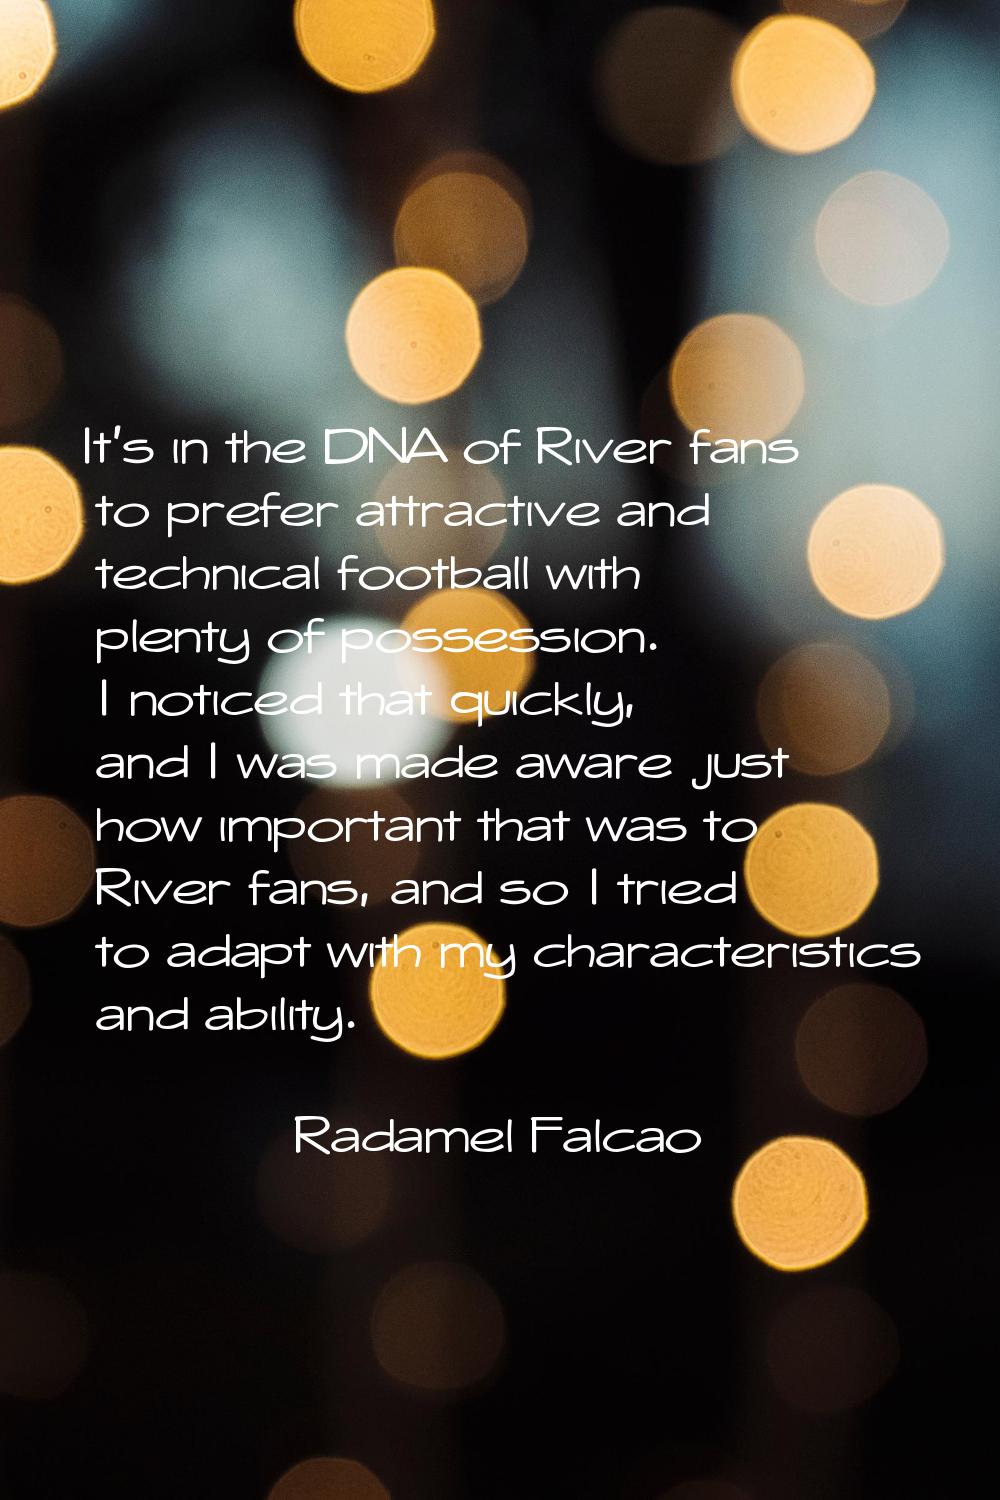 It's in the DNA of River fans to prefer attractive and technical football with plenty of possession